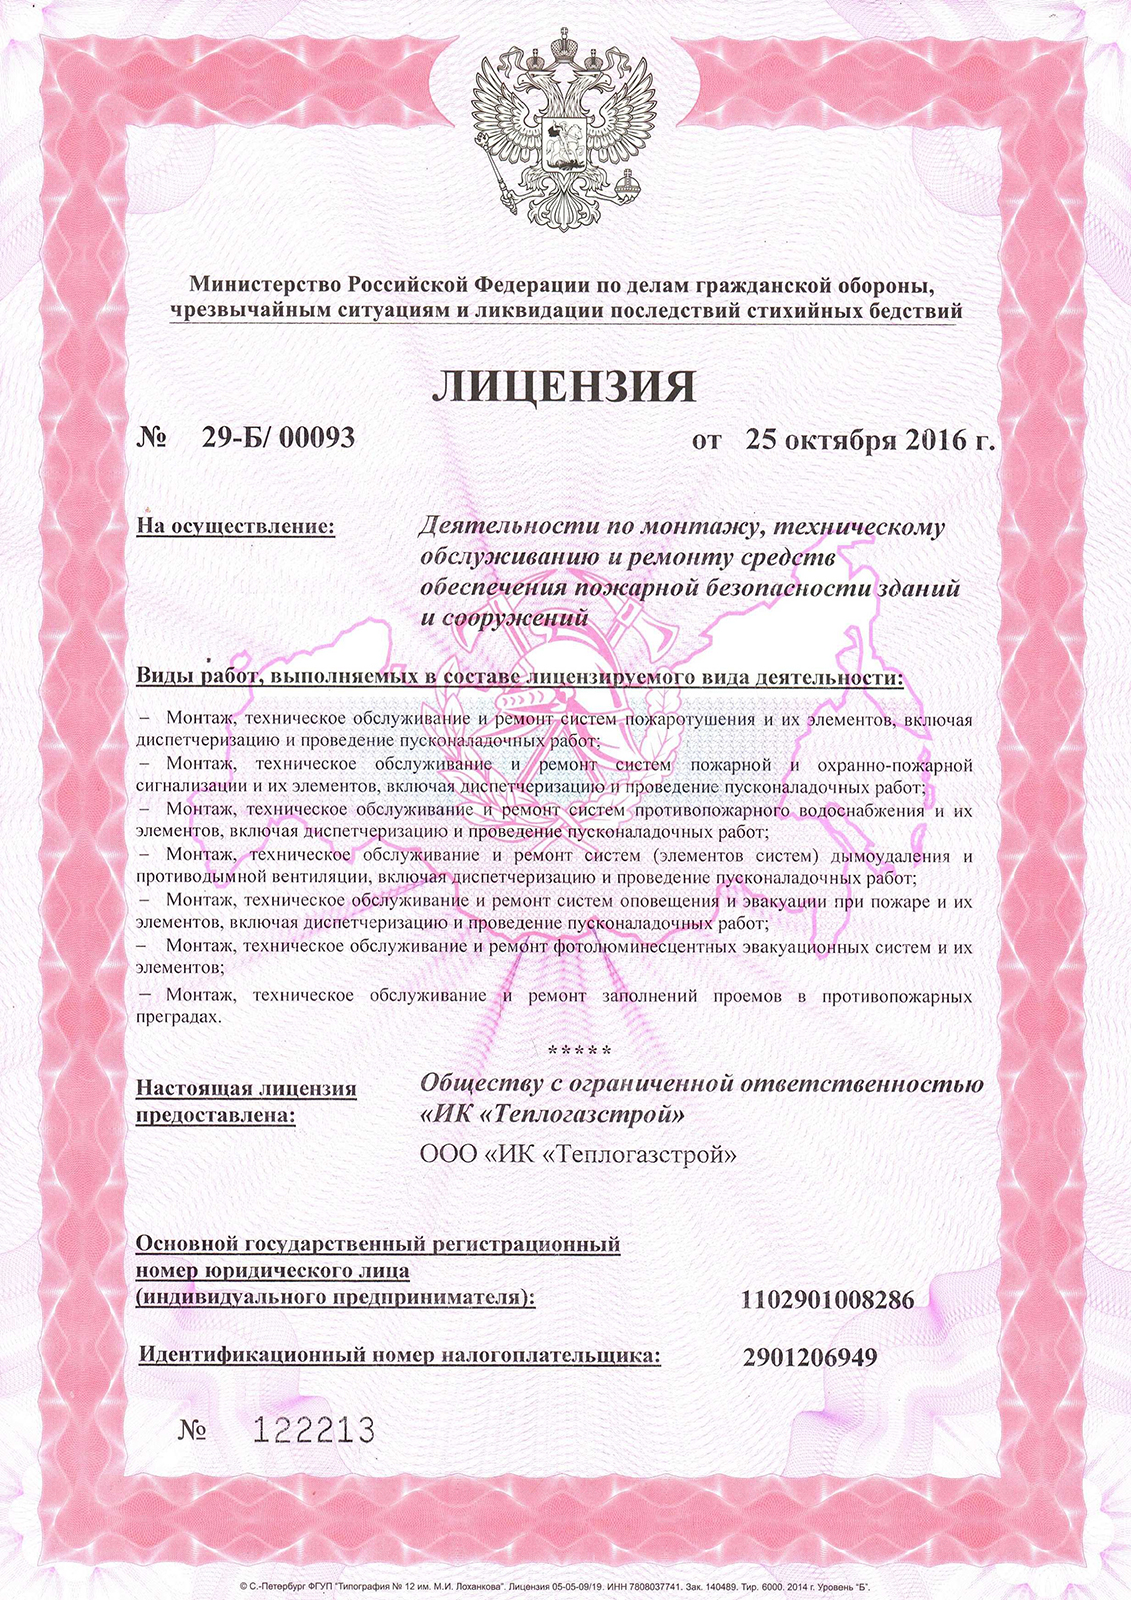 License for the implementation of activities for the installation, maintenance and repair of fire safety equipment for buildings and structures (front side)